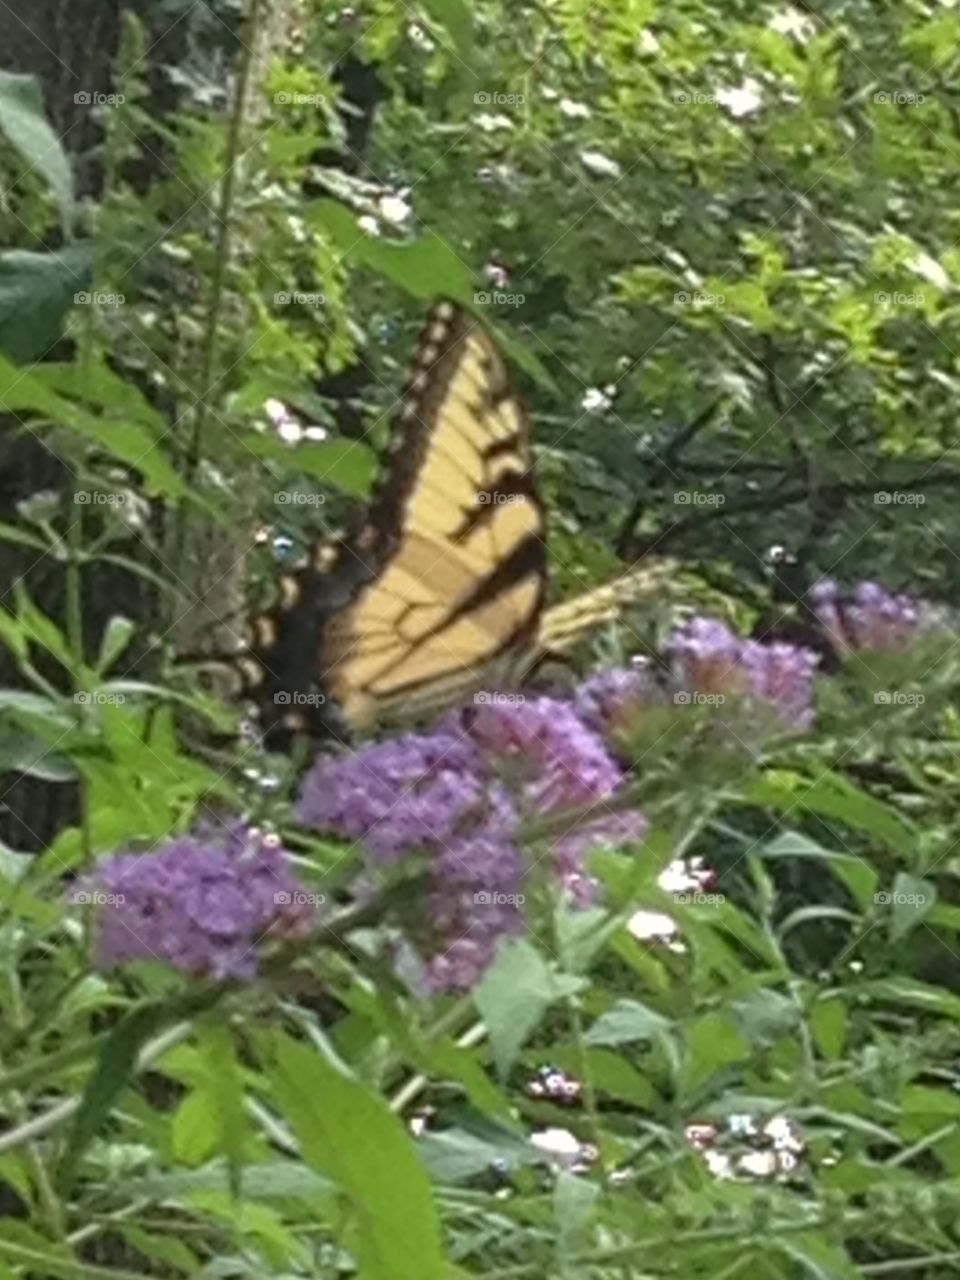 Swallowtail Butterfly in Park. Swallowtail Butterfly on Lavender Flowers at Annandale Community Park, Annandale, VA